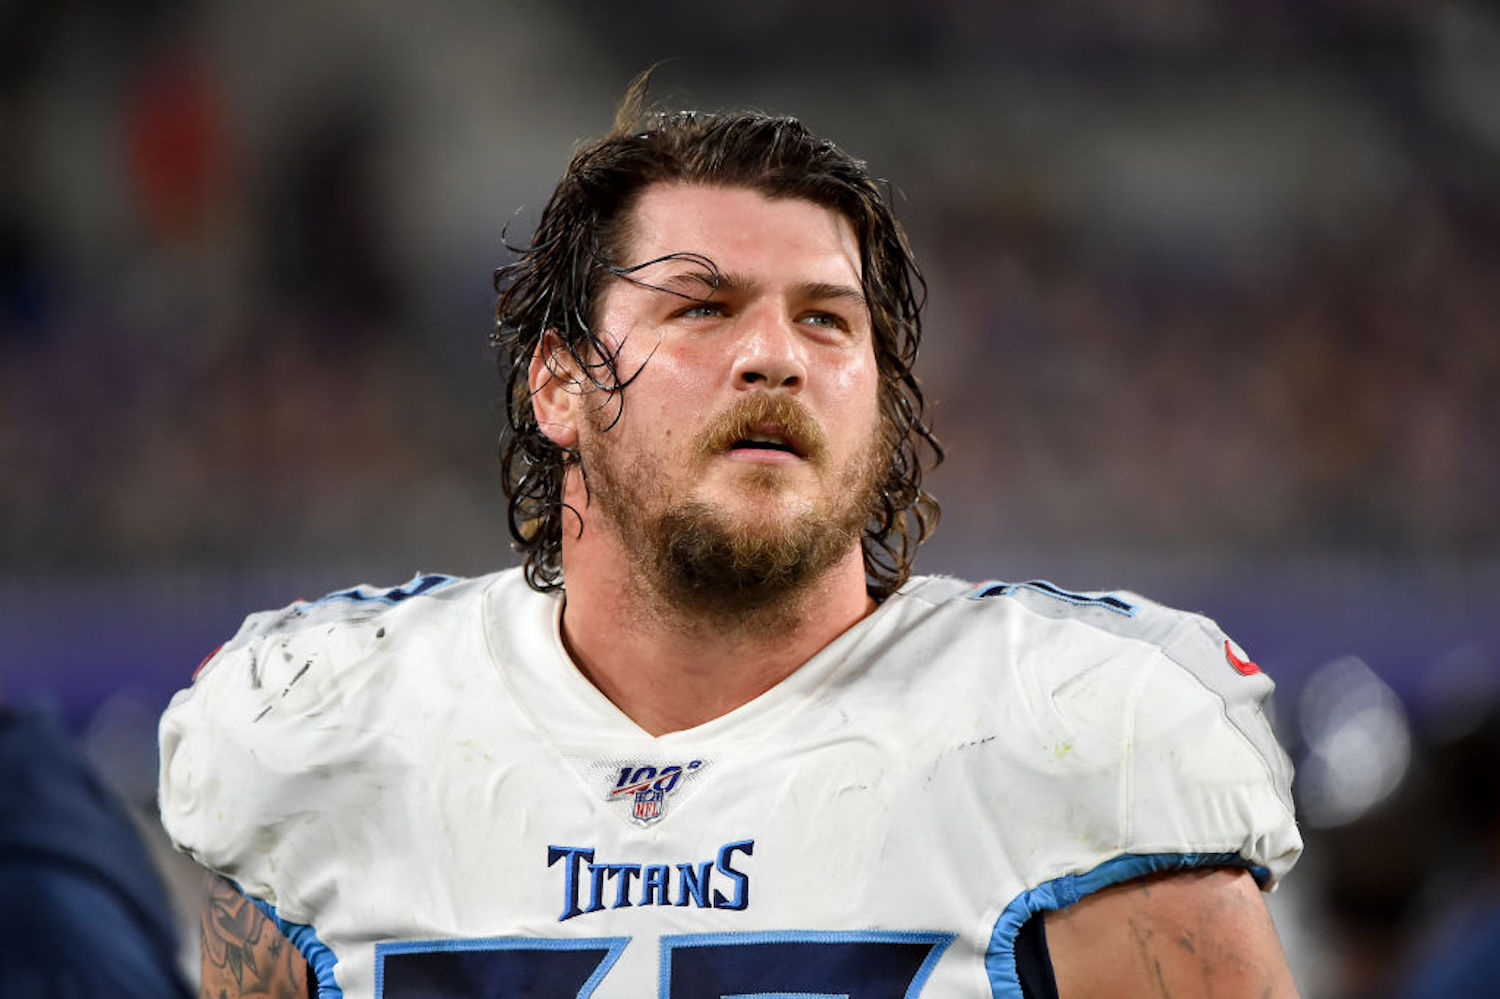 Taylor Lewan is one of the most important players on the Tennesee Titans, so his season-ending injury is a devastating blow to the team.